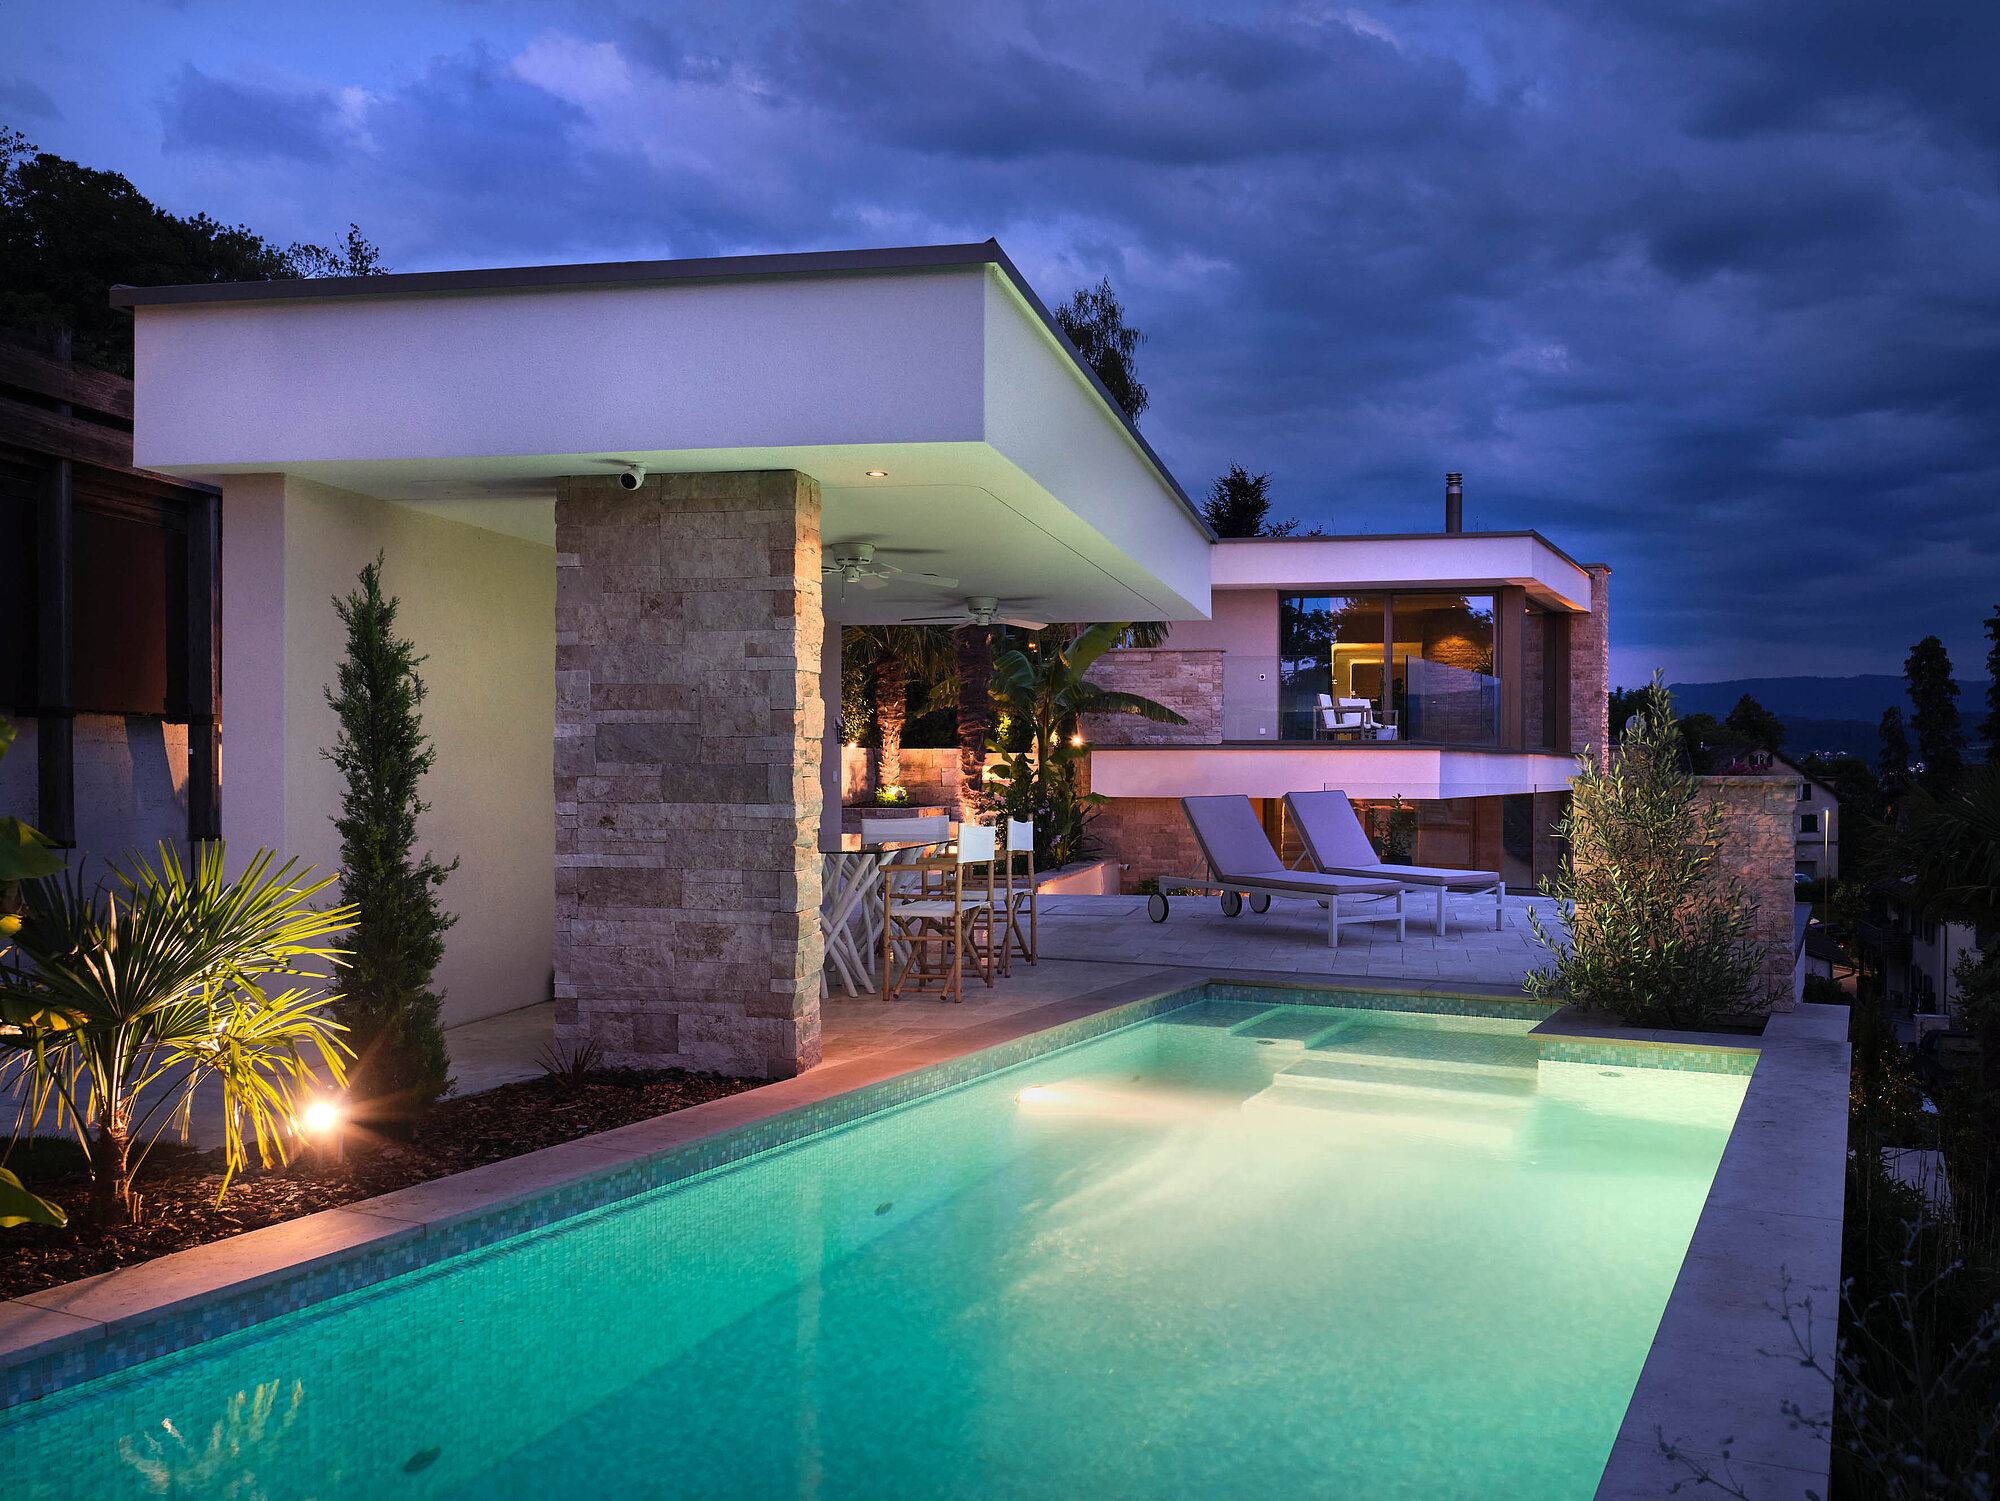 Exterior view of the DOLCE VITA detached house, pool